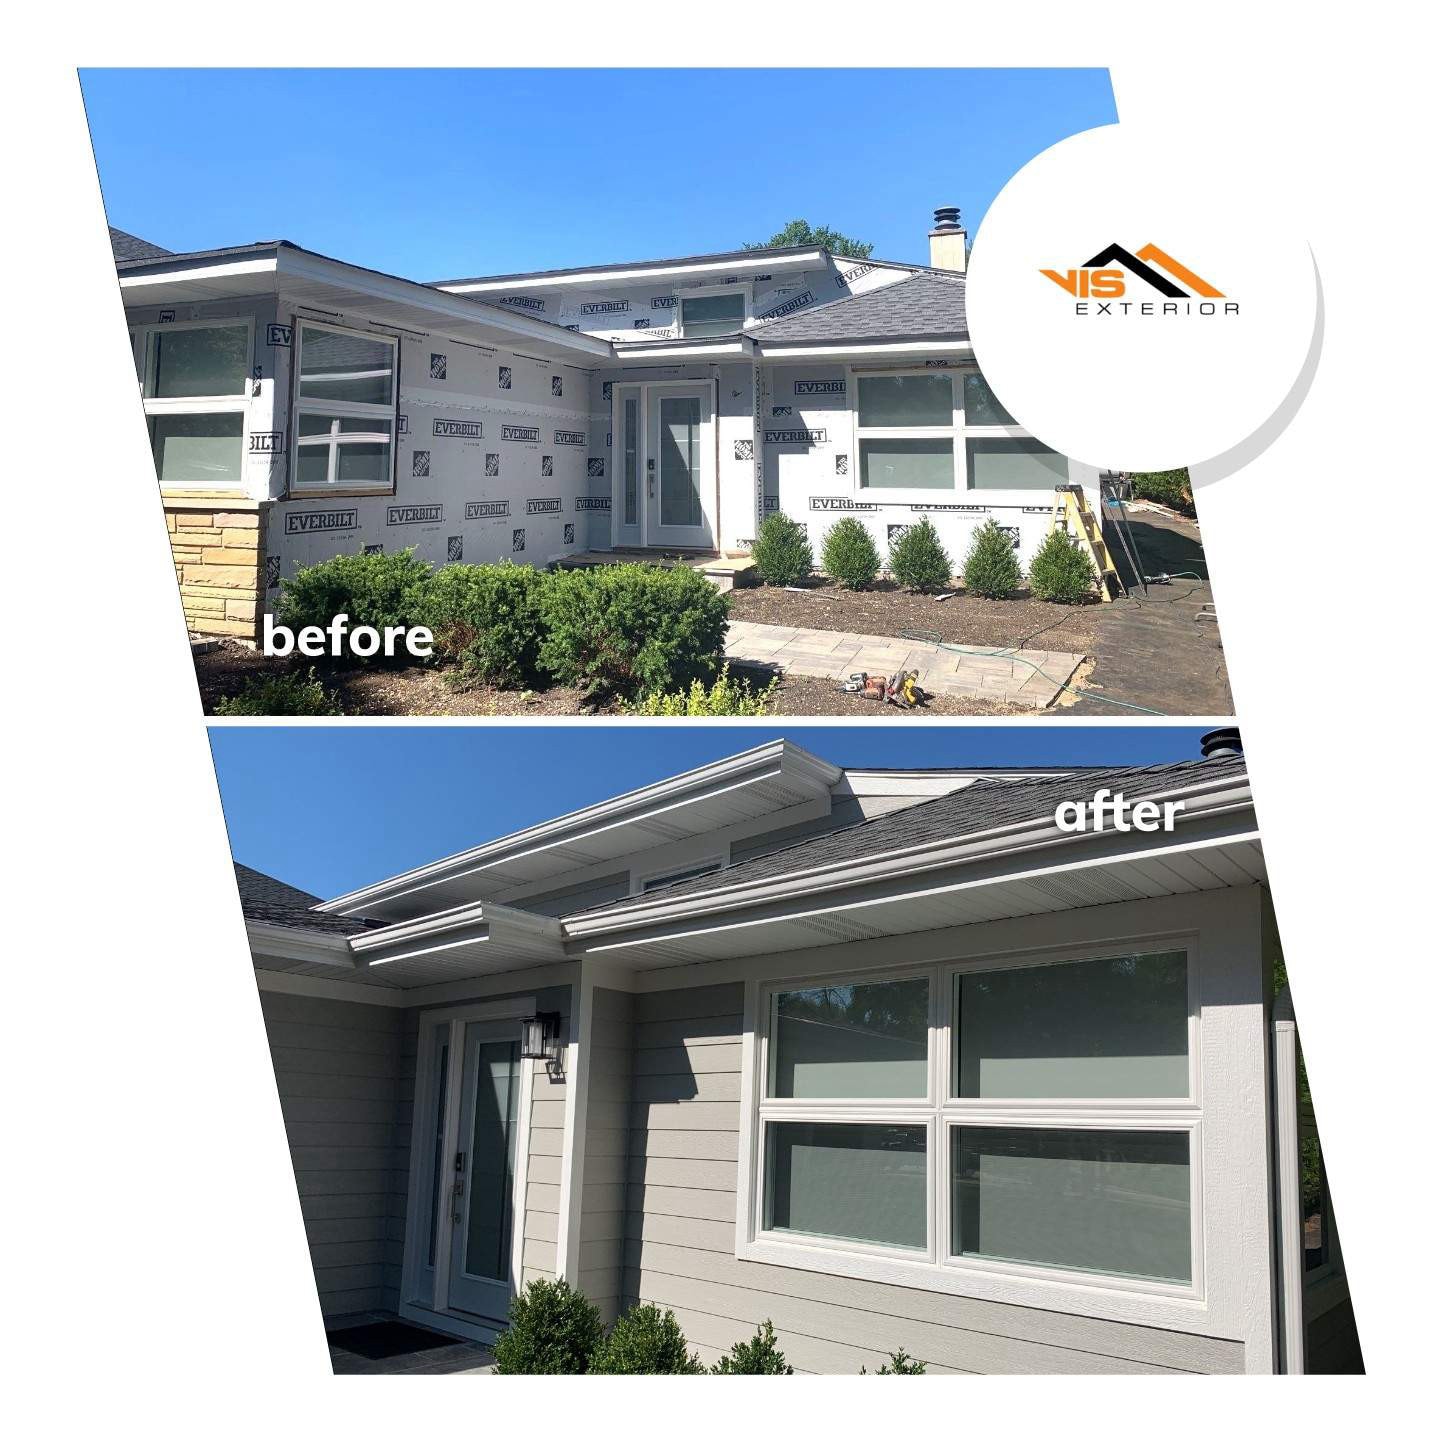 LP SmartSide siding installation and shingle roof replacement in Hinsdale before after project photo